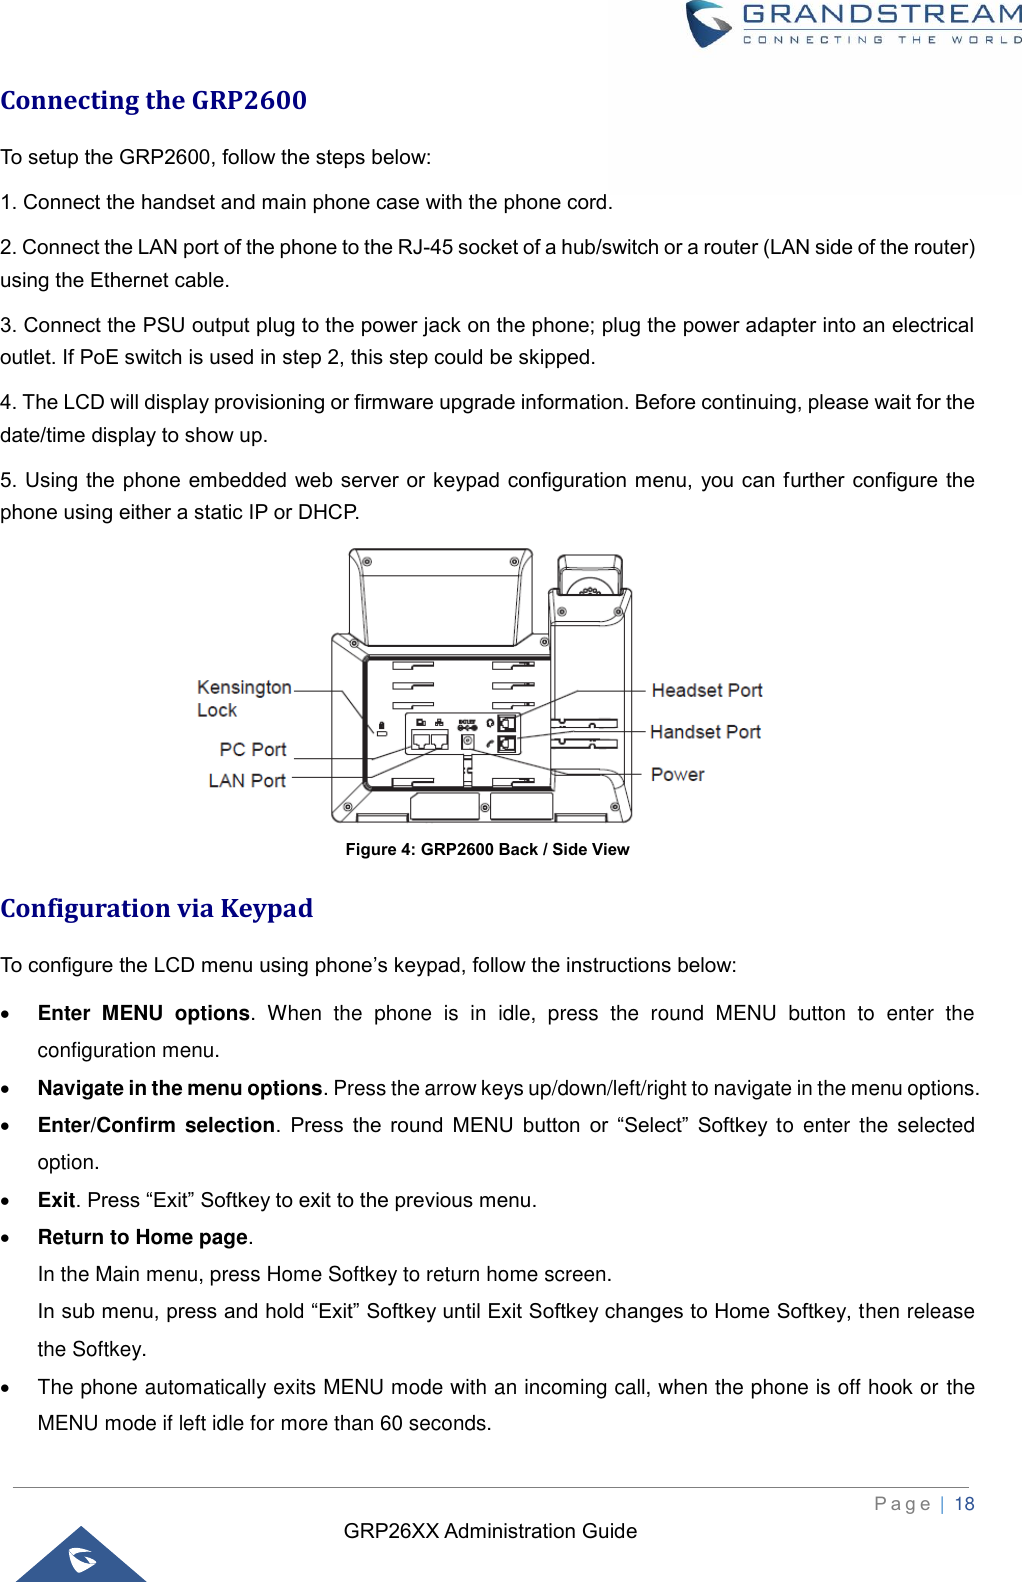 GRP26XX Administration Guide          P a g e  | 18   Connecting the GRP2600 To setup the GRP2600, follow the steps below:   1. Connect the handset and main phone case with the phone cord.   2. Connect the LAN port of the phone to the RJ-45 socket of a hub/switch or a router (LAN side of the router) using the Ethernet cable.   3. Connect the PSU output plug to the power jack on the phone; plug the power adapter into an electrical outlet. If PoE switch is used in step 2, this step could be skipped.   4. The LCD will display provisioning or firmware upgrade information. Before continuing, please wait for the date/time display to show up.   5. Using the phone embedded  web server or keypad configuration menu,  you can further configure the phone using either a static IP or DHCP.  Figure 4: GRP2600 Back / Side View Configuration via Keypad To configure the LCD menu using phone’s keypad, follow the instructions below: • Enter  MENU  options.  When  the  phone  is  in  idle,  press  the  round  MENU  button  to  enter  the configuration menu. • Navigate in the menu options. Press the arrow keys up/down/left/right to navigate in the menu options. • Enter/Confirm  selection.  Press  the  round  MENU  button  or  “Select”  Softkey  to  enter  the  selected option. • Exit. Press “Exit” Softkey to exit to the previous menu. • Return to Home page.   In the Main menu, press Home Softkey to return home screen. In sub menu, press and hold “Exit” Softkey until Exit Softkey changes to Home Softkey, then release the Softkey.   •  The phone automatically exits MENU mode with an incoming call, when the phone is off hook or the MENU mode if left idle for more than 60 seconds. 